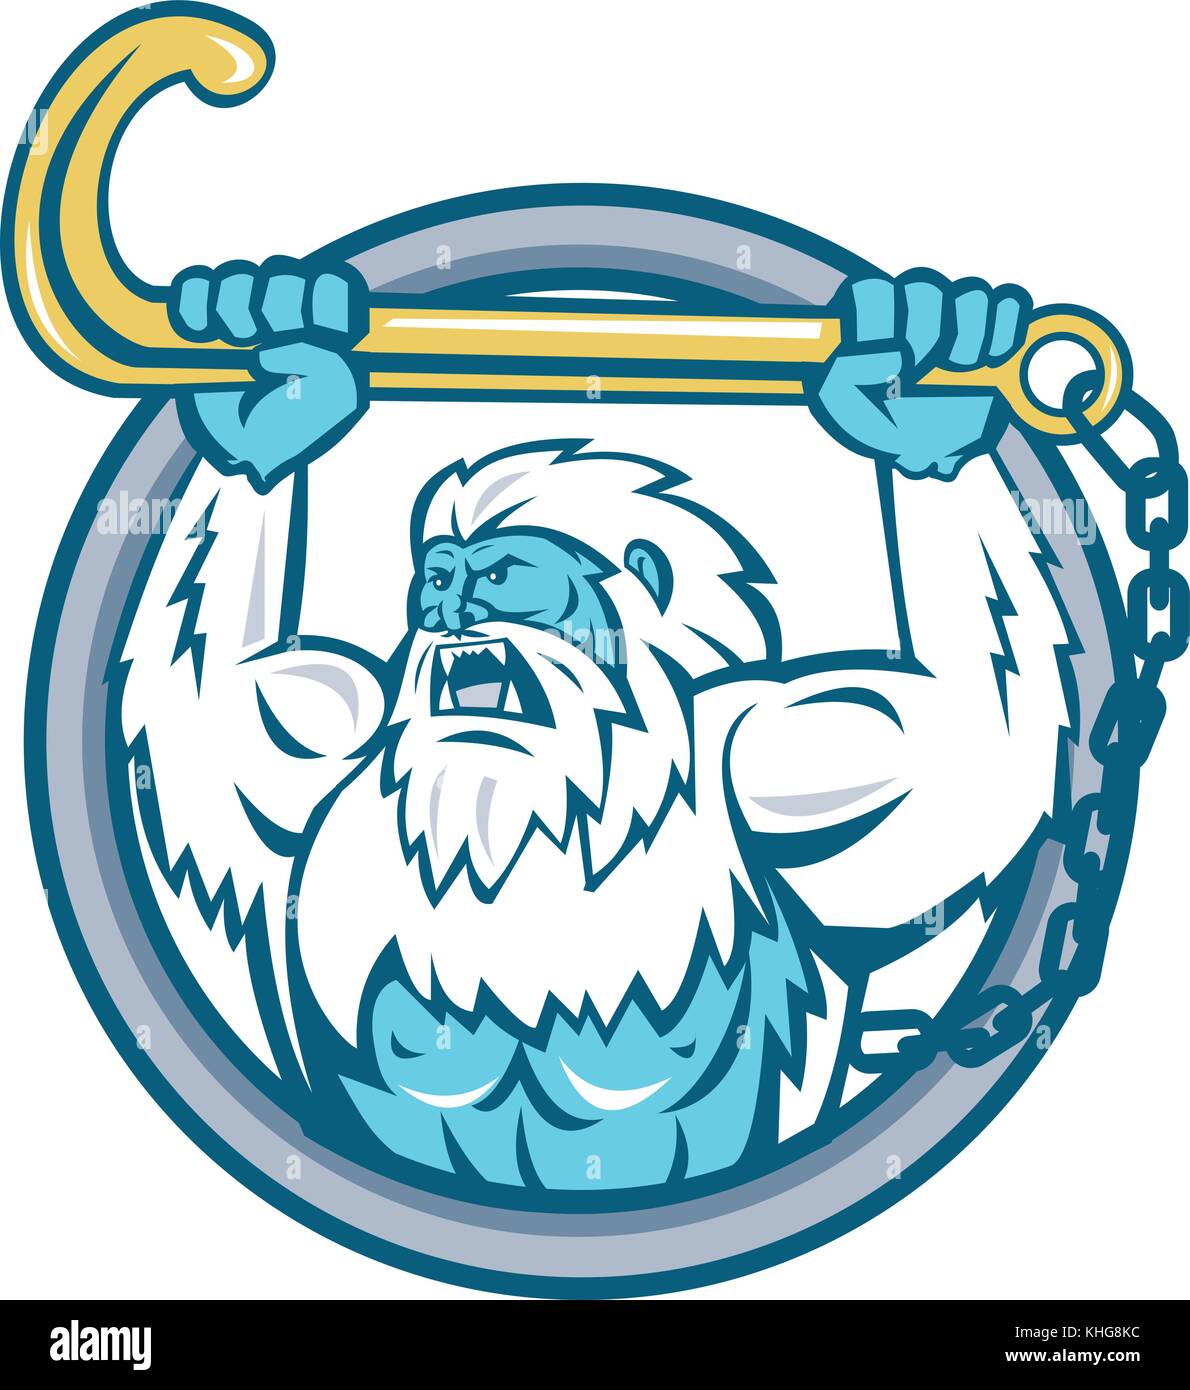 Retro style illustration of a muscular yeti or Abominable Snowman, an ape-like entity lifting or holding up a j hook or tow hook set inside circle on  Stock Vector